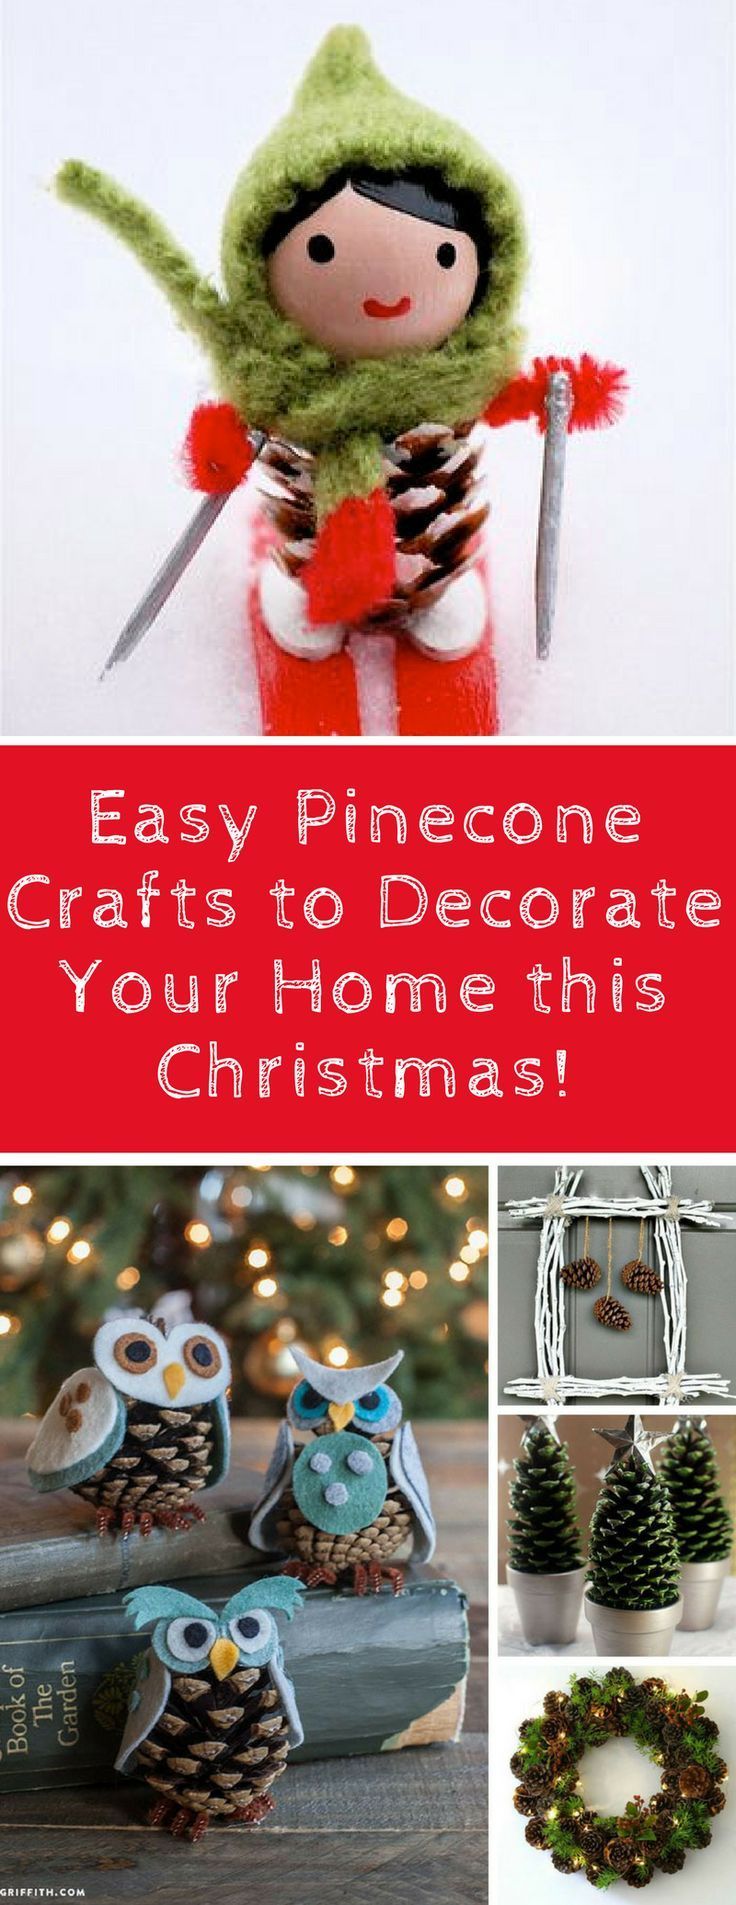 14 Easy Pinecone Crafts to Decorate Your Home this Christmas! -   25 pinecone crafts for children
 ideas